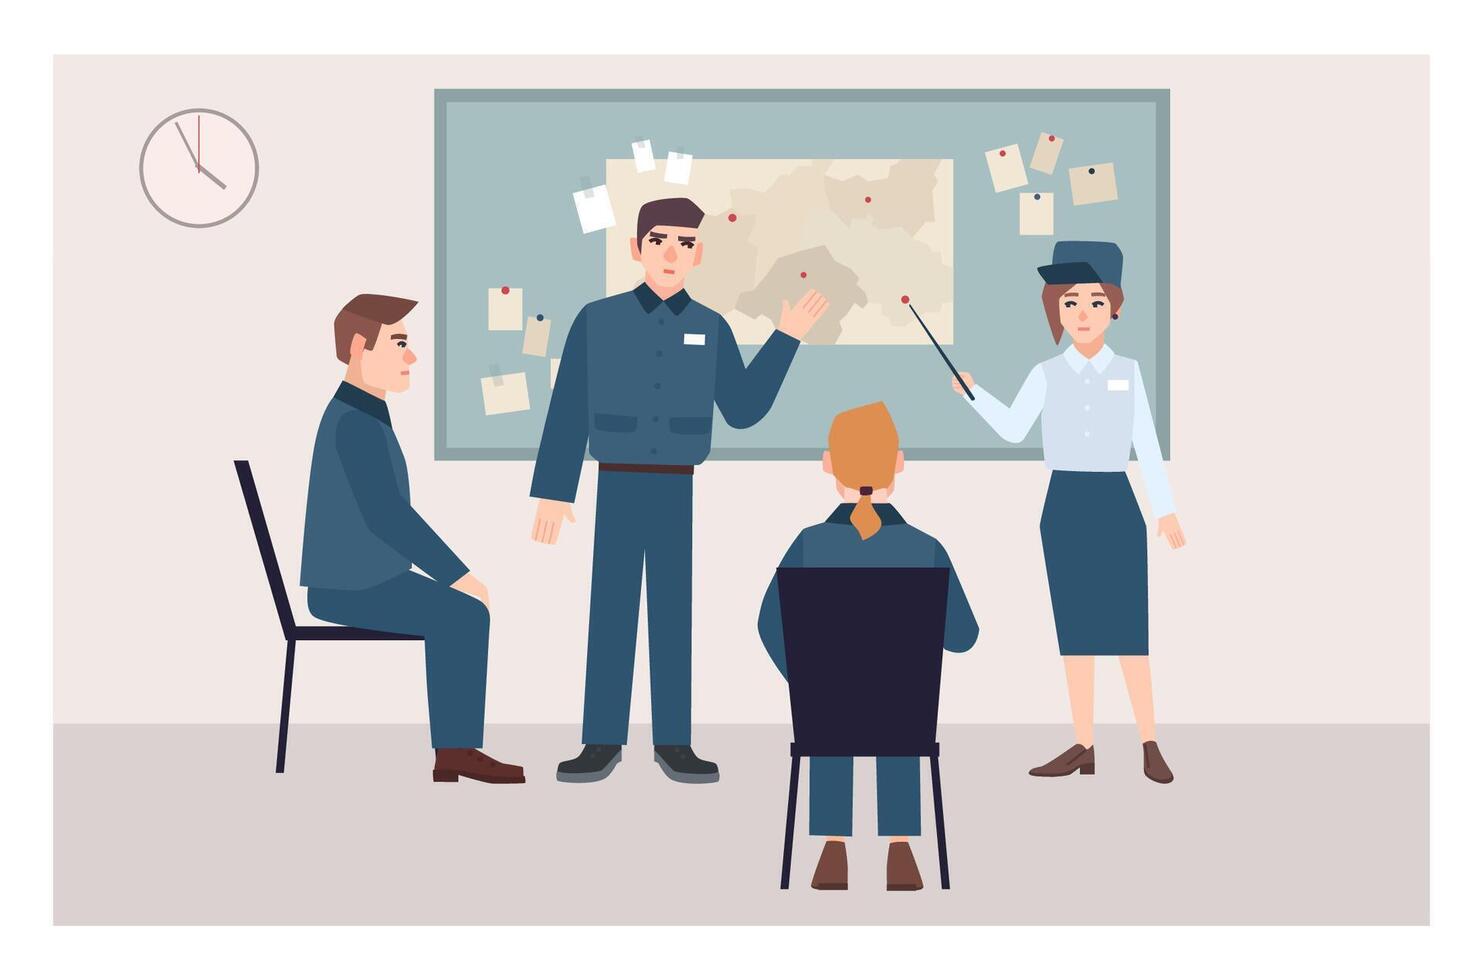 Group of male and female police officers sitting on chairs and standing beside pin board. Crime investigation process, evidence examination procedure. Flat cartoon characters. Vector illustration.